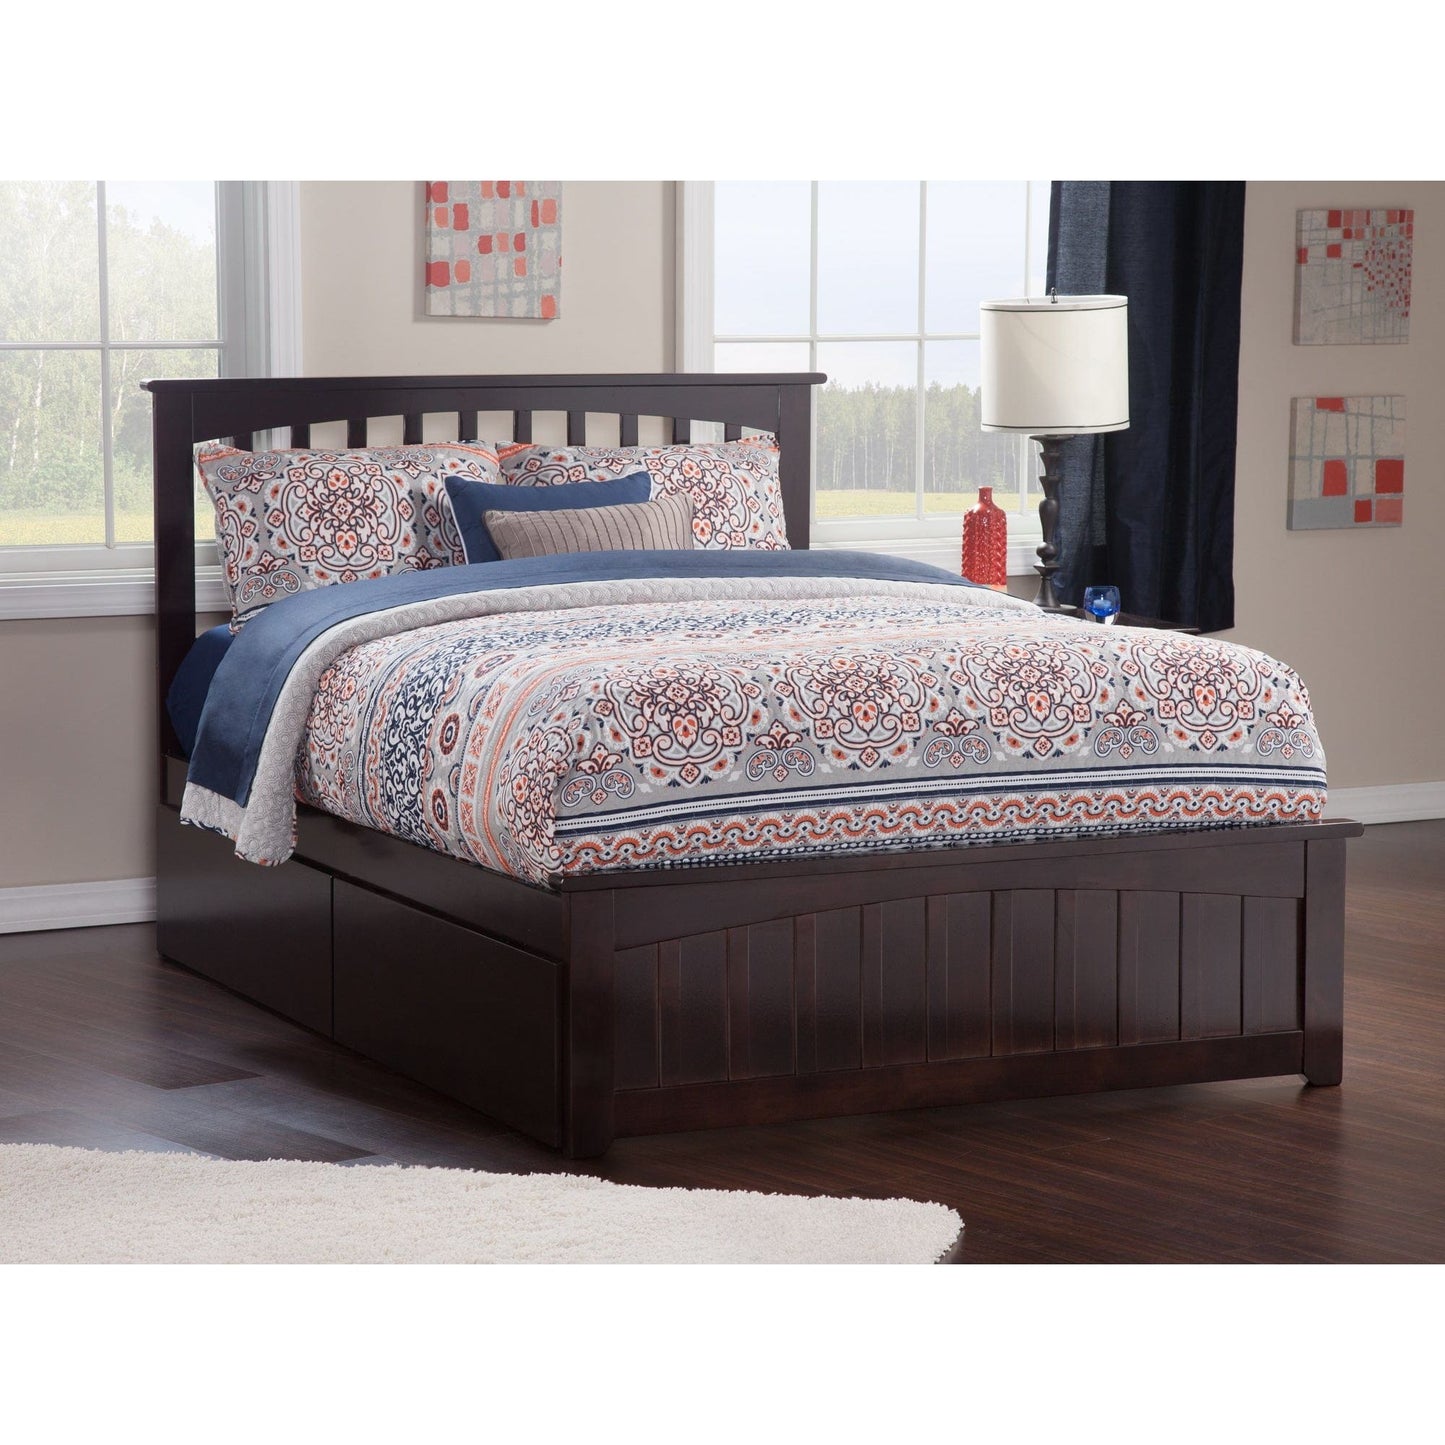 AFI Furnishings Mission Full Platform Bed with Matching Foot Board with 2 Urban Bed Drawers